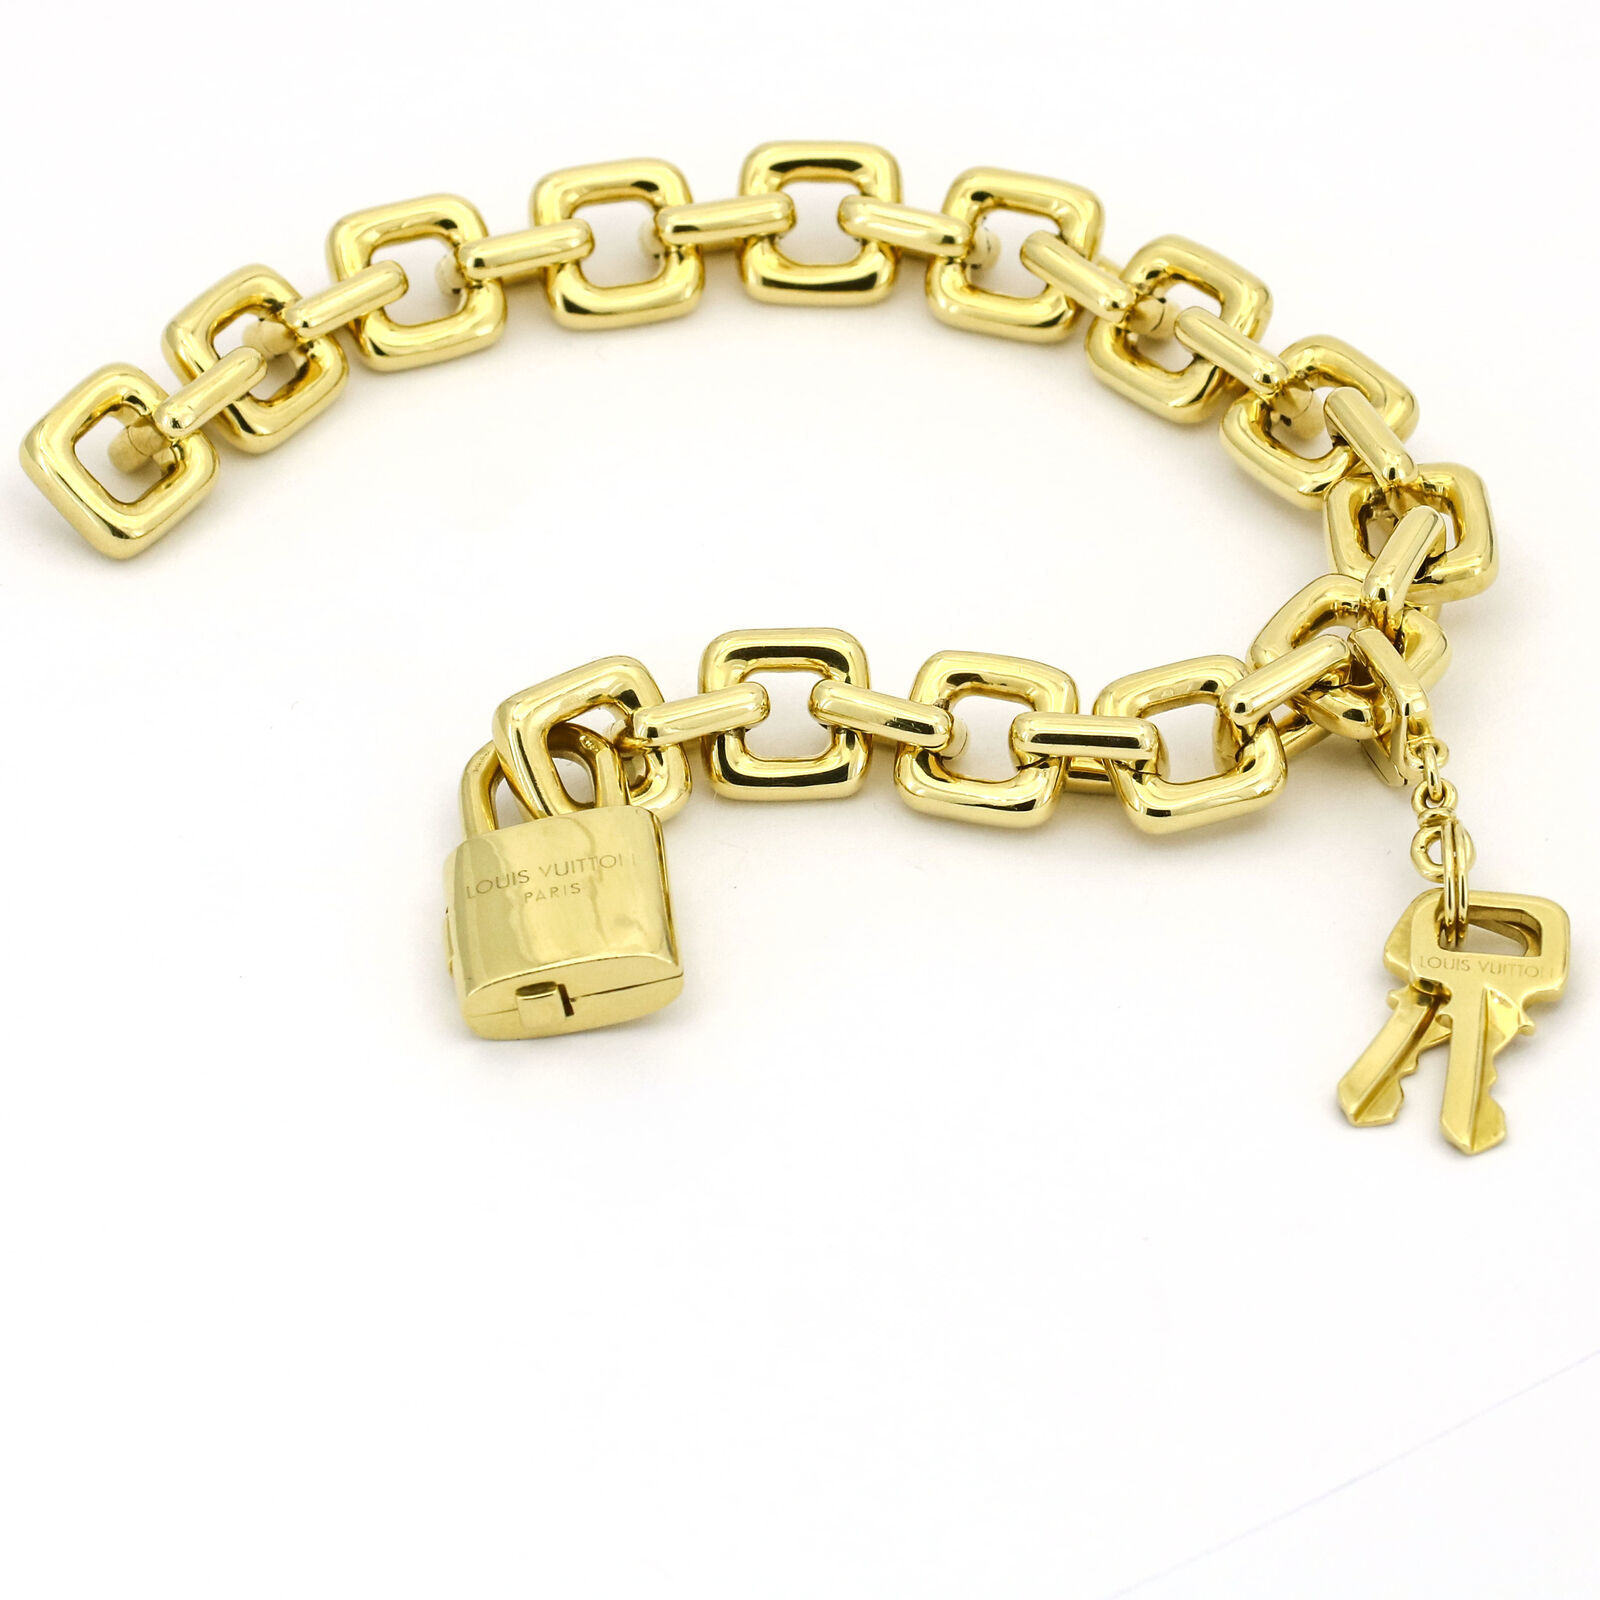 Louis Vuitton Padlock and Keys Charm Bracelet in 18k Yellow Gold with ...